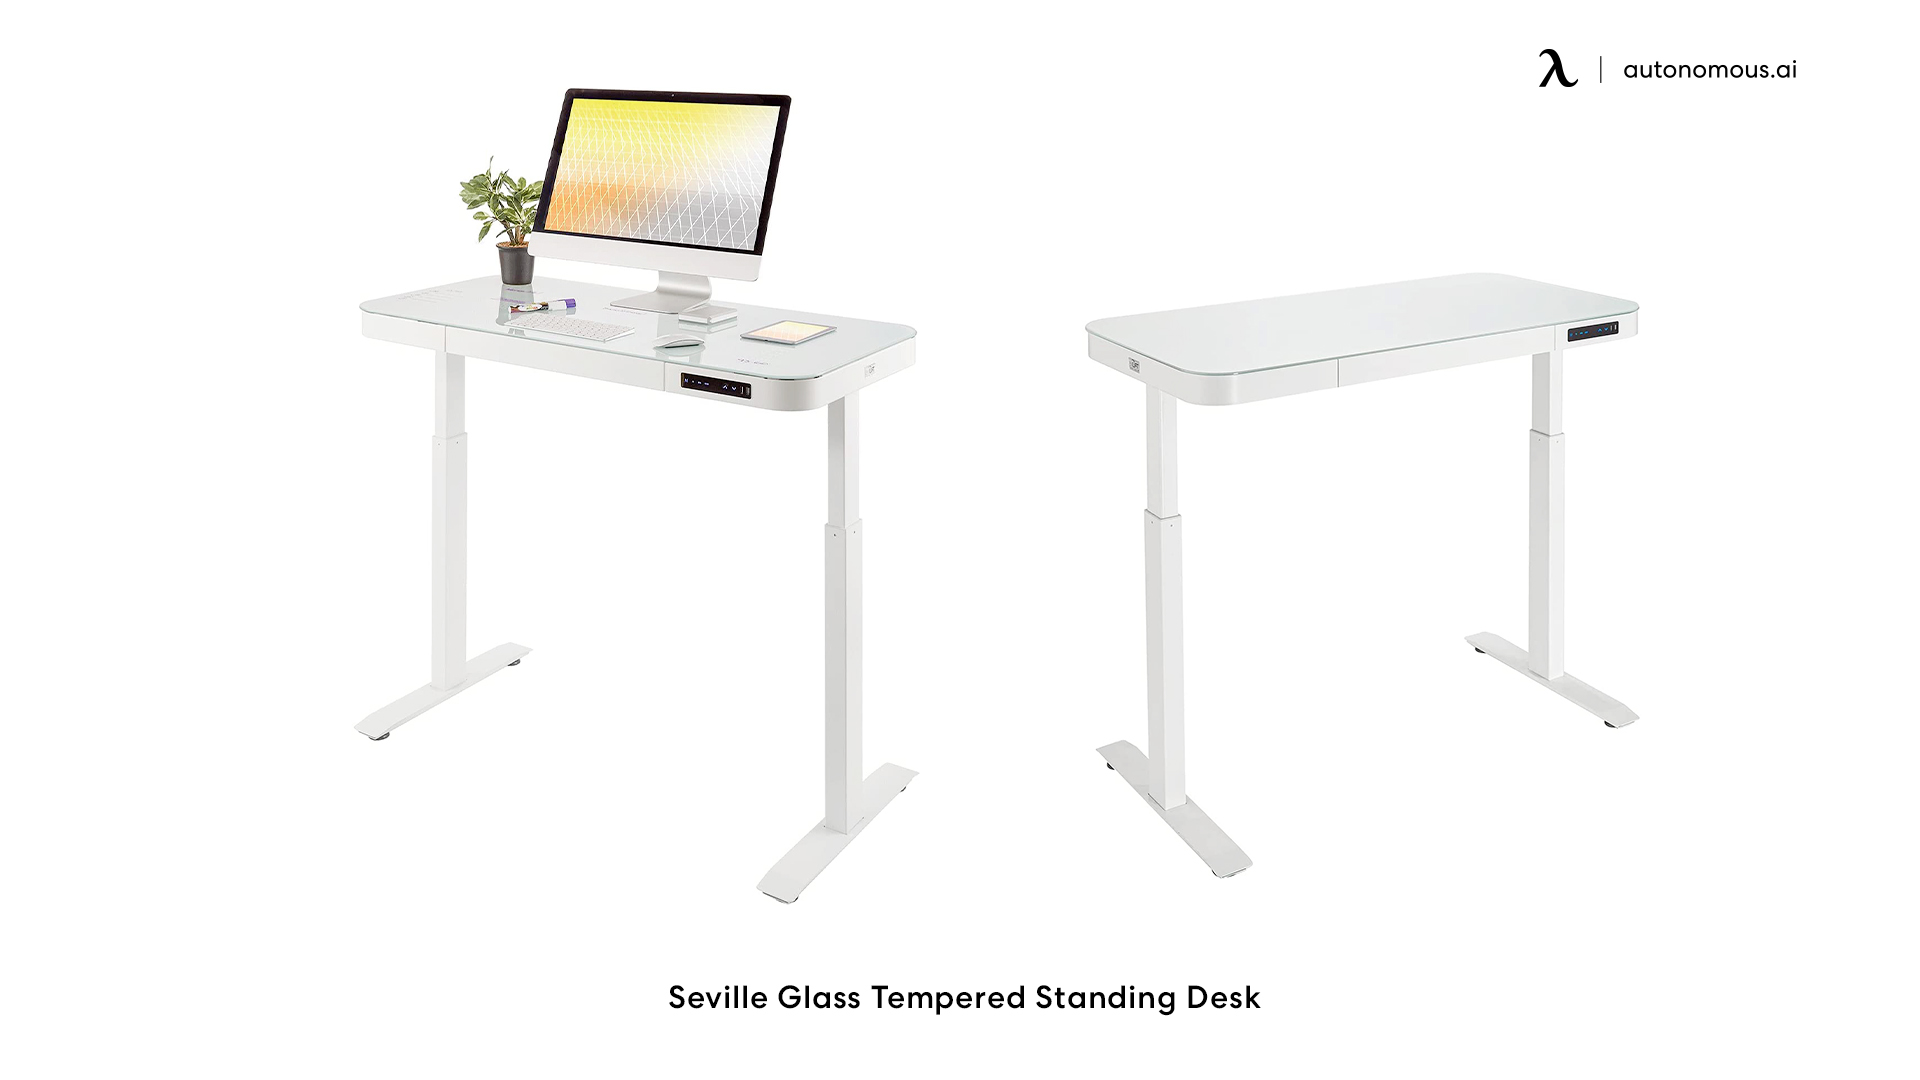 AirLift Tempered Glass Desk from Seville Classics